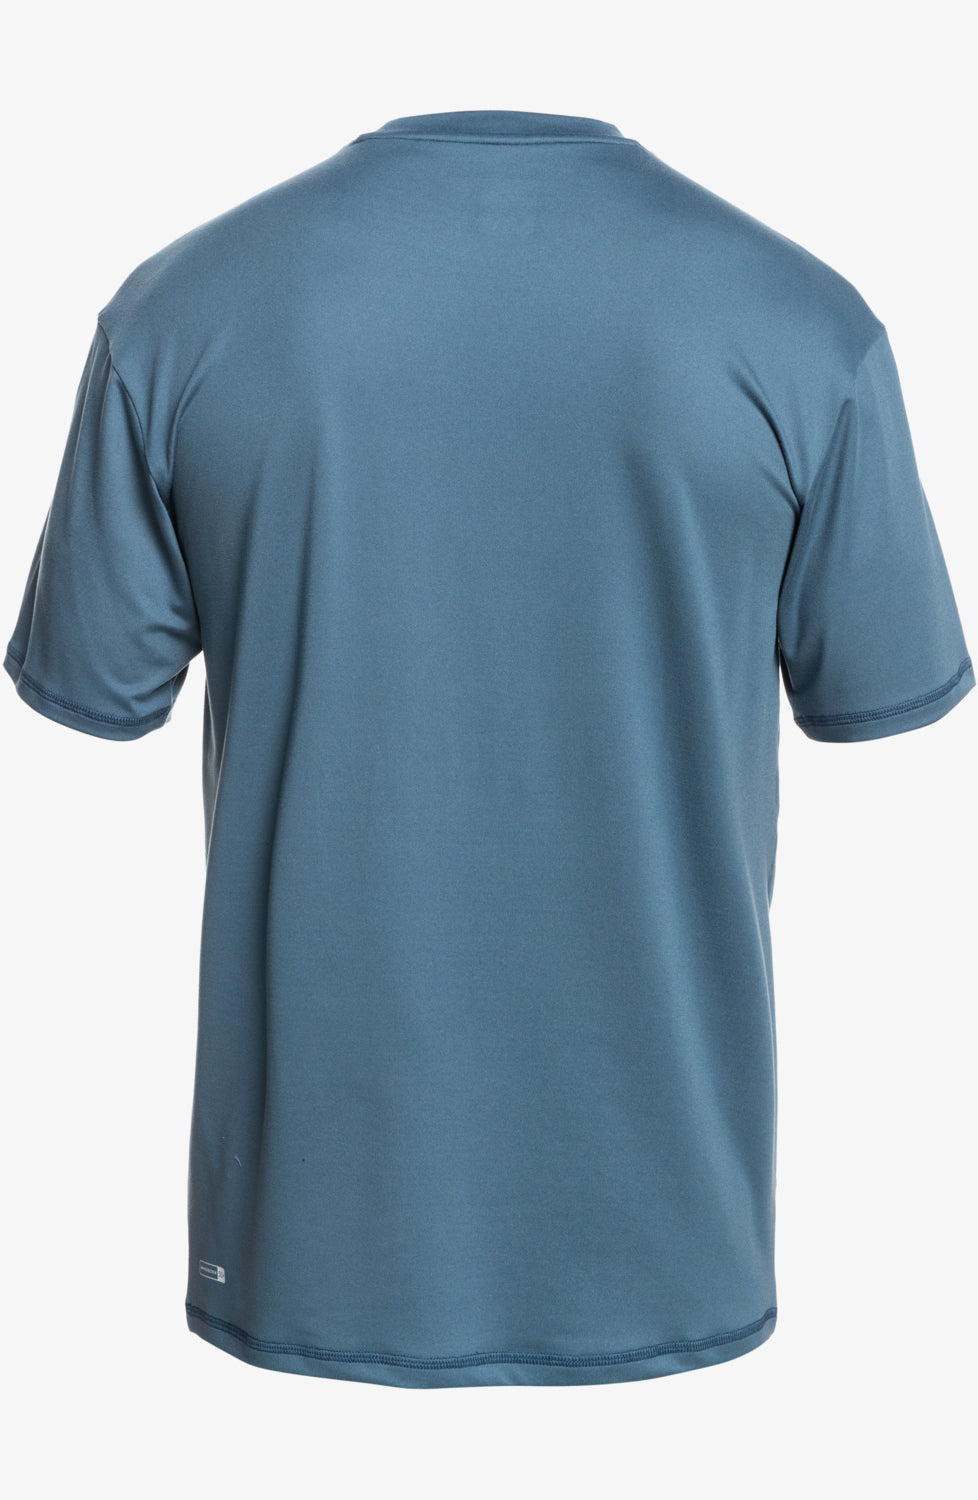 Quiksilver: Omni Session UPF Short Sleeve Surf Tee